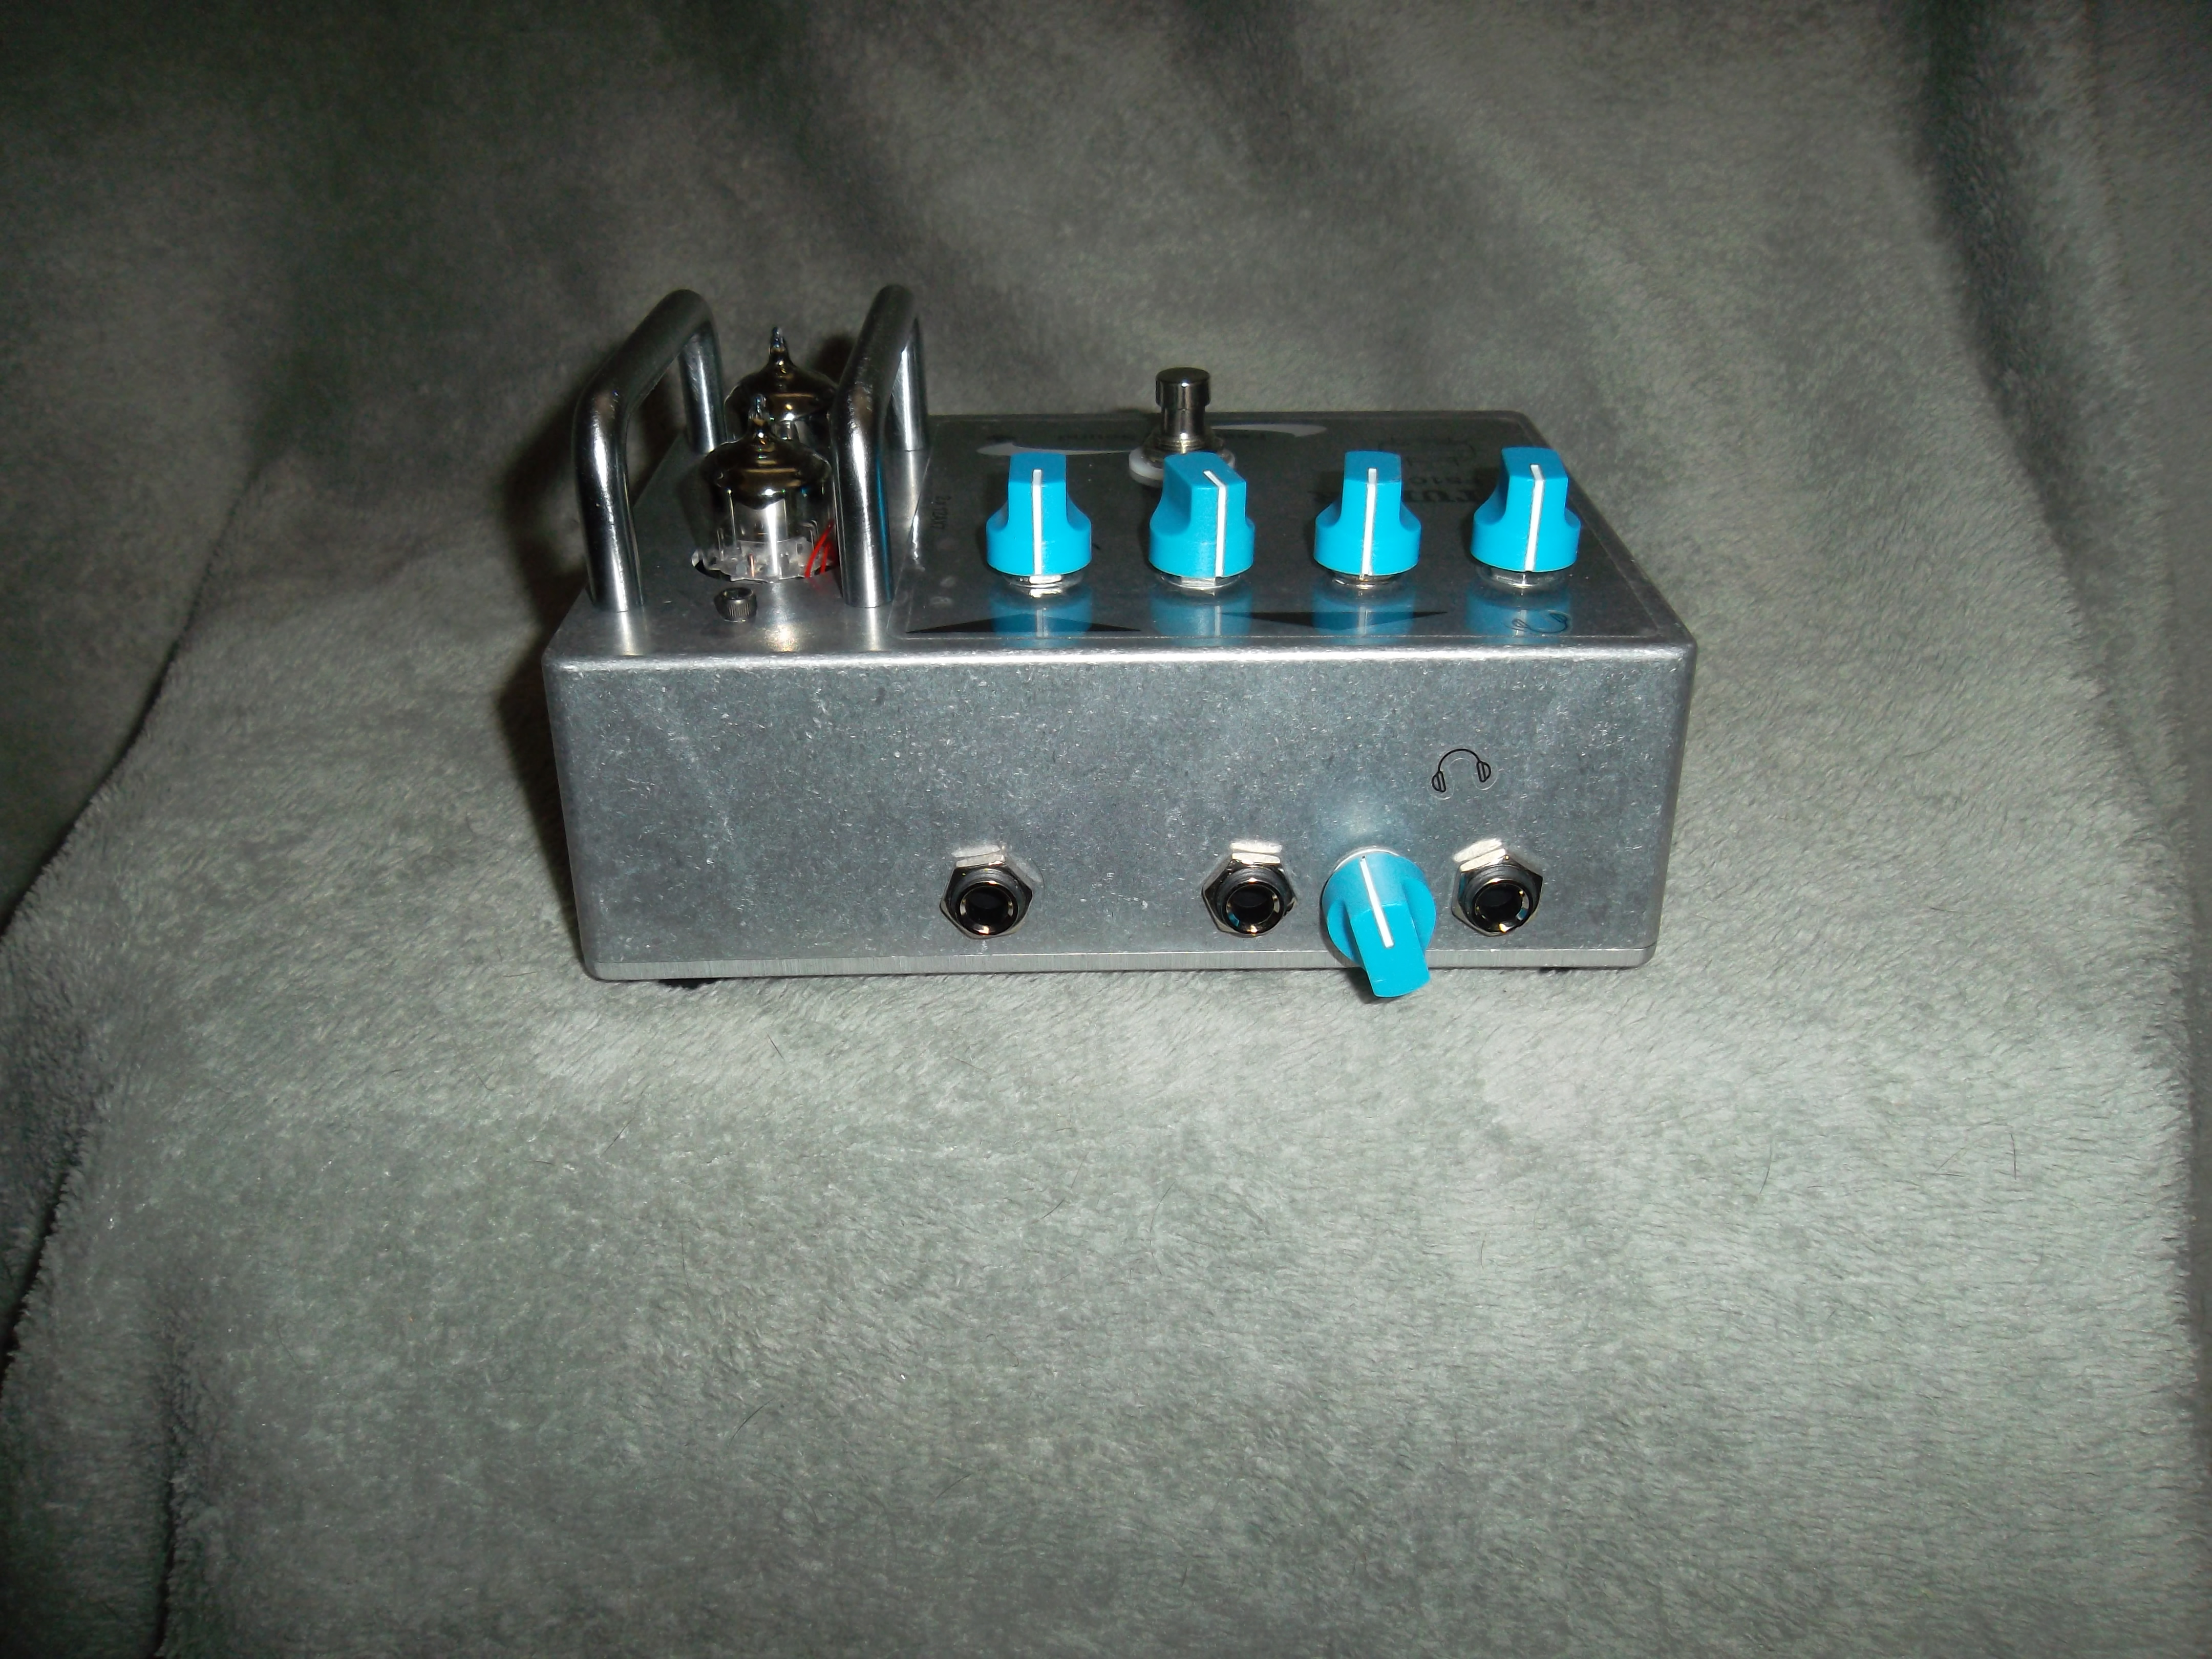 TUBER FS1C+M rear panel showing input and output jacks, headphone jack (TRS) and headphone output level control 